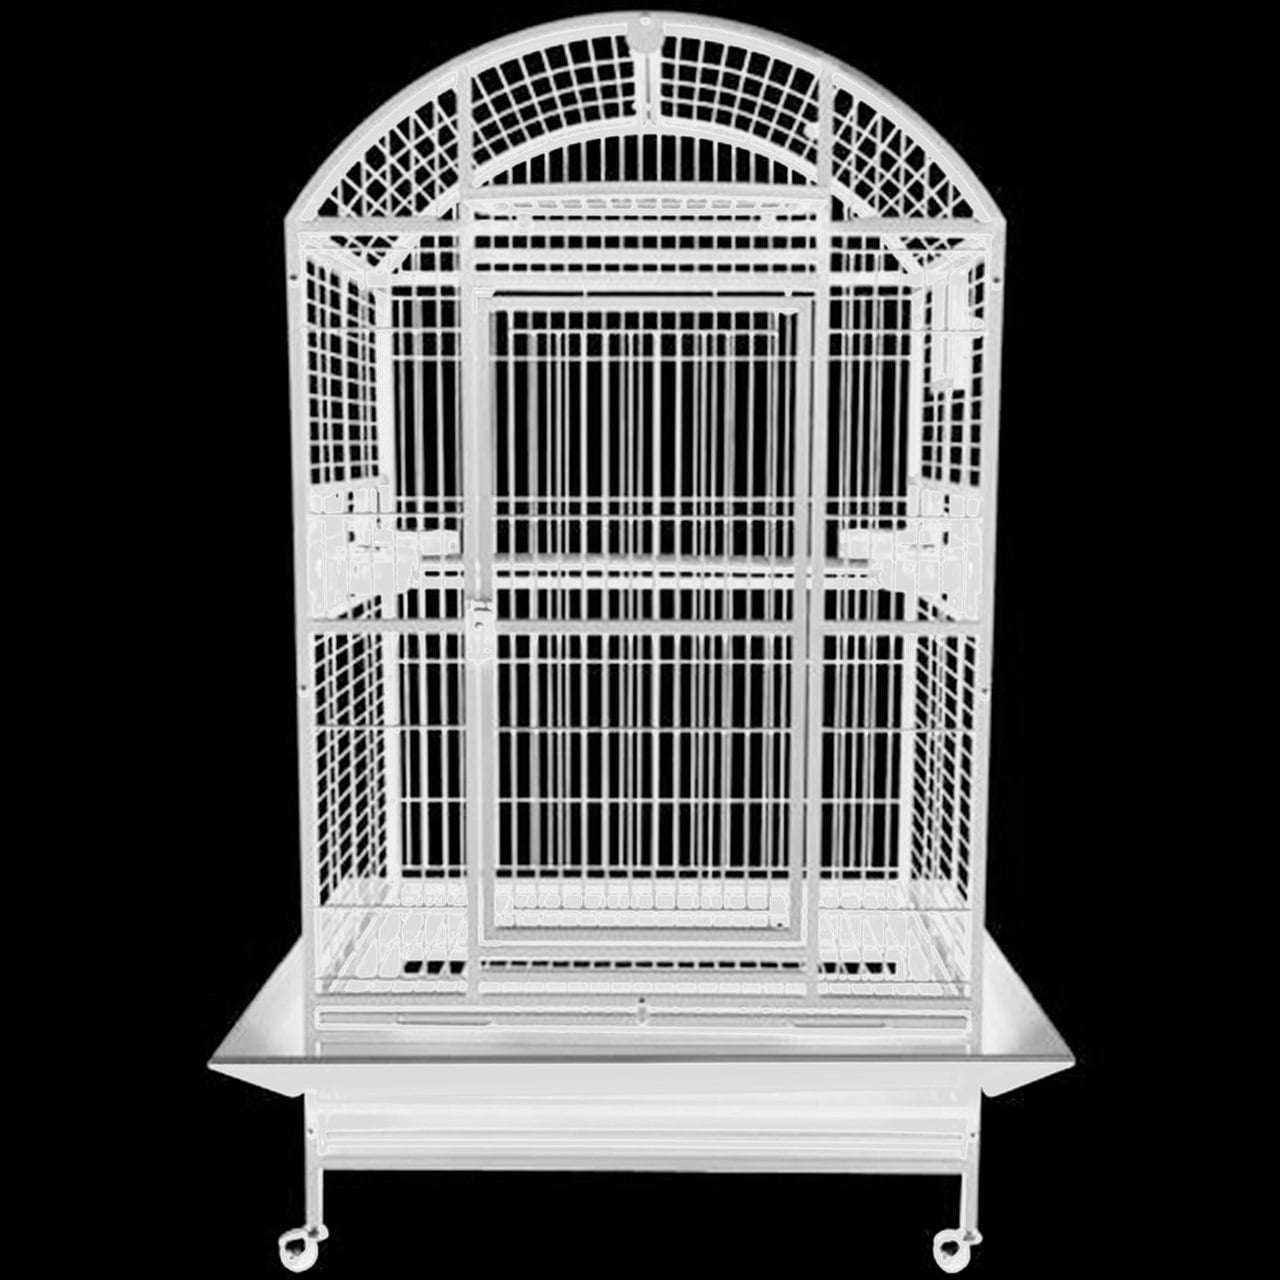 kings-cages-9003628-dome-top-bird-cage-white-walmart